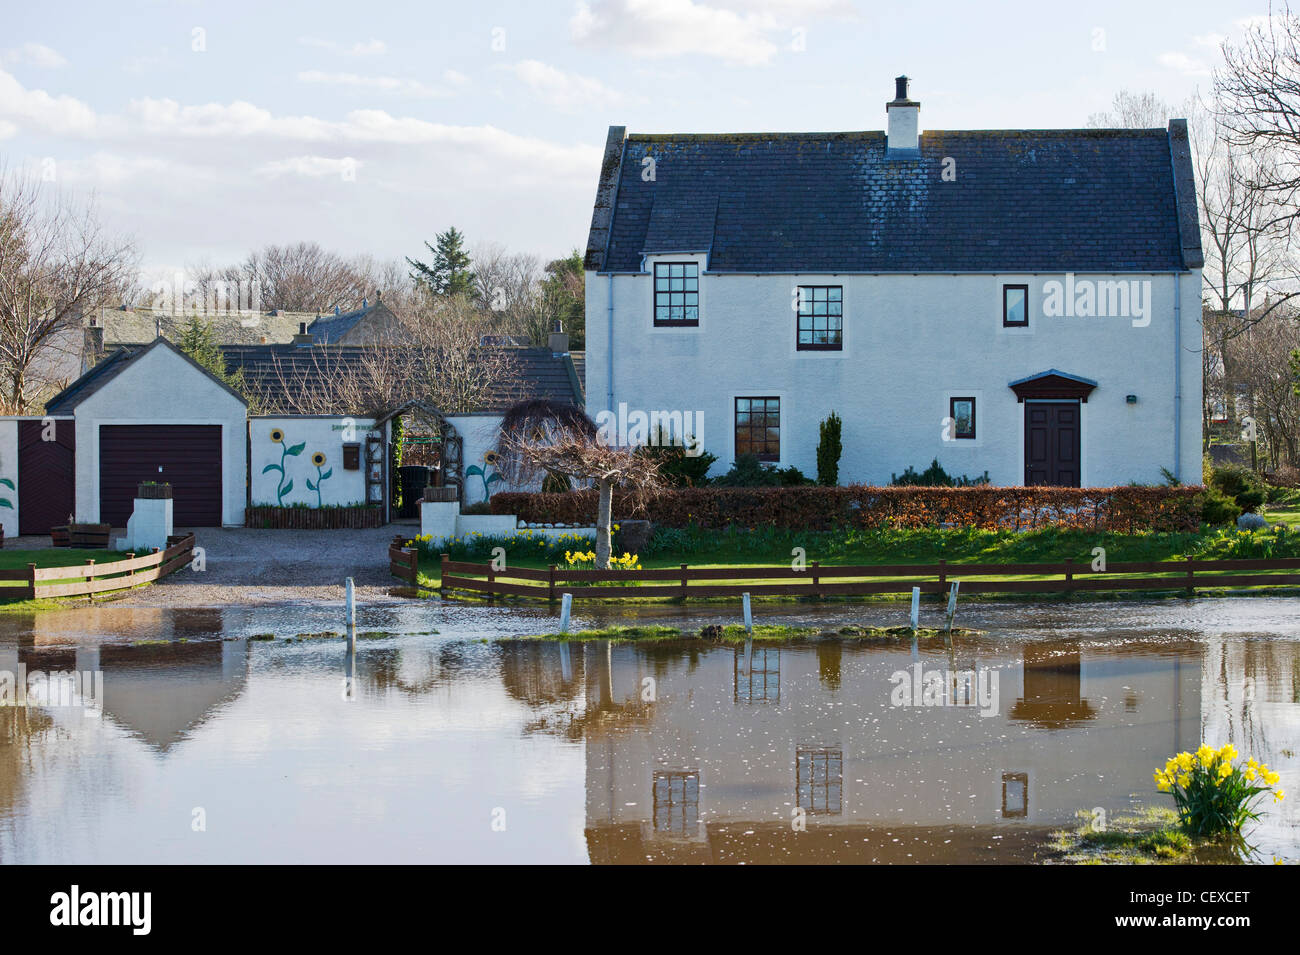 Flood water from River Spey surrounds property in Garmouth, Scotland in April 2010 due to heavy snow melt. Stock Photo